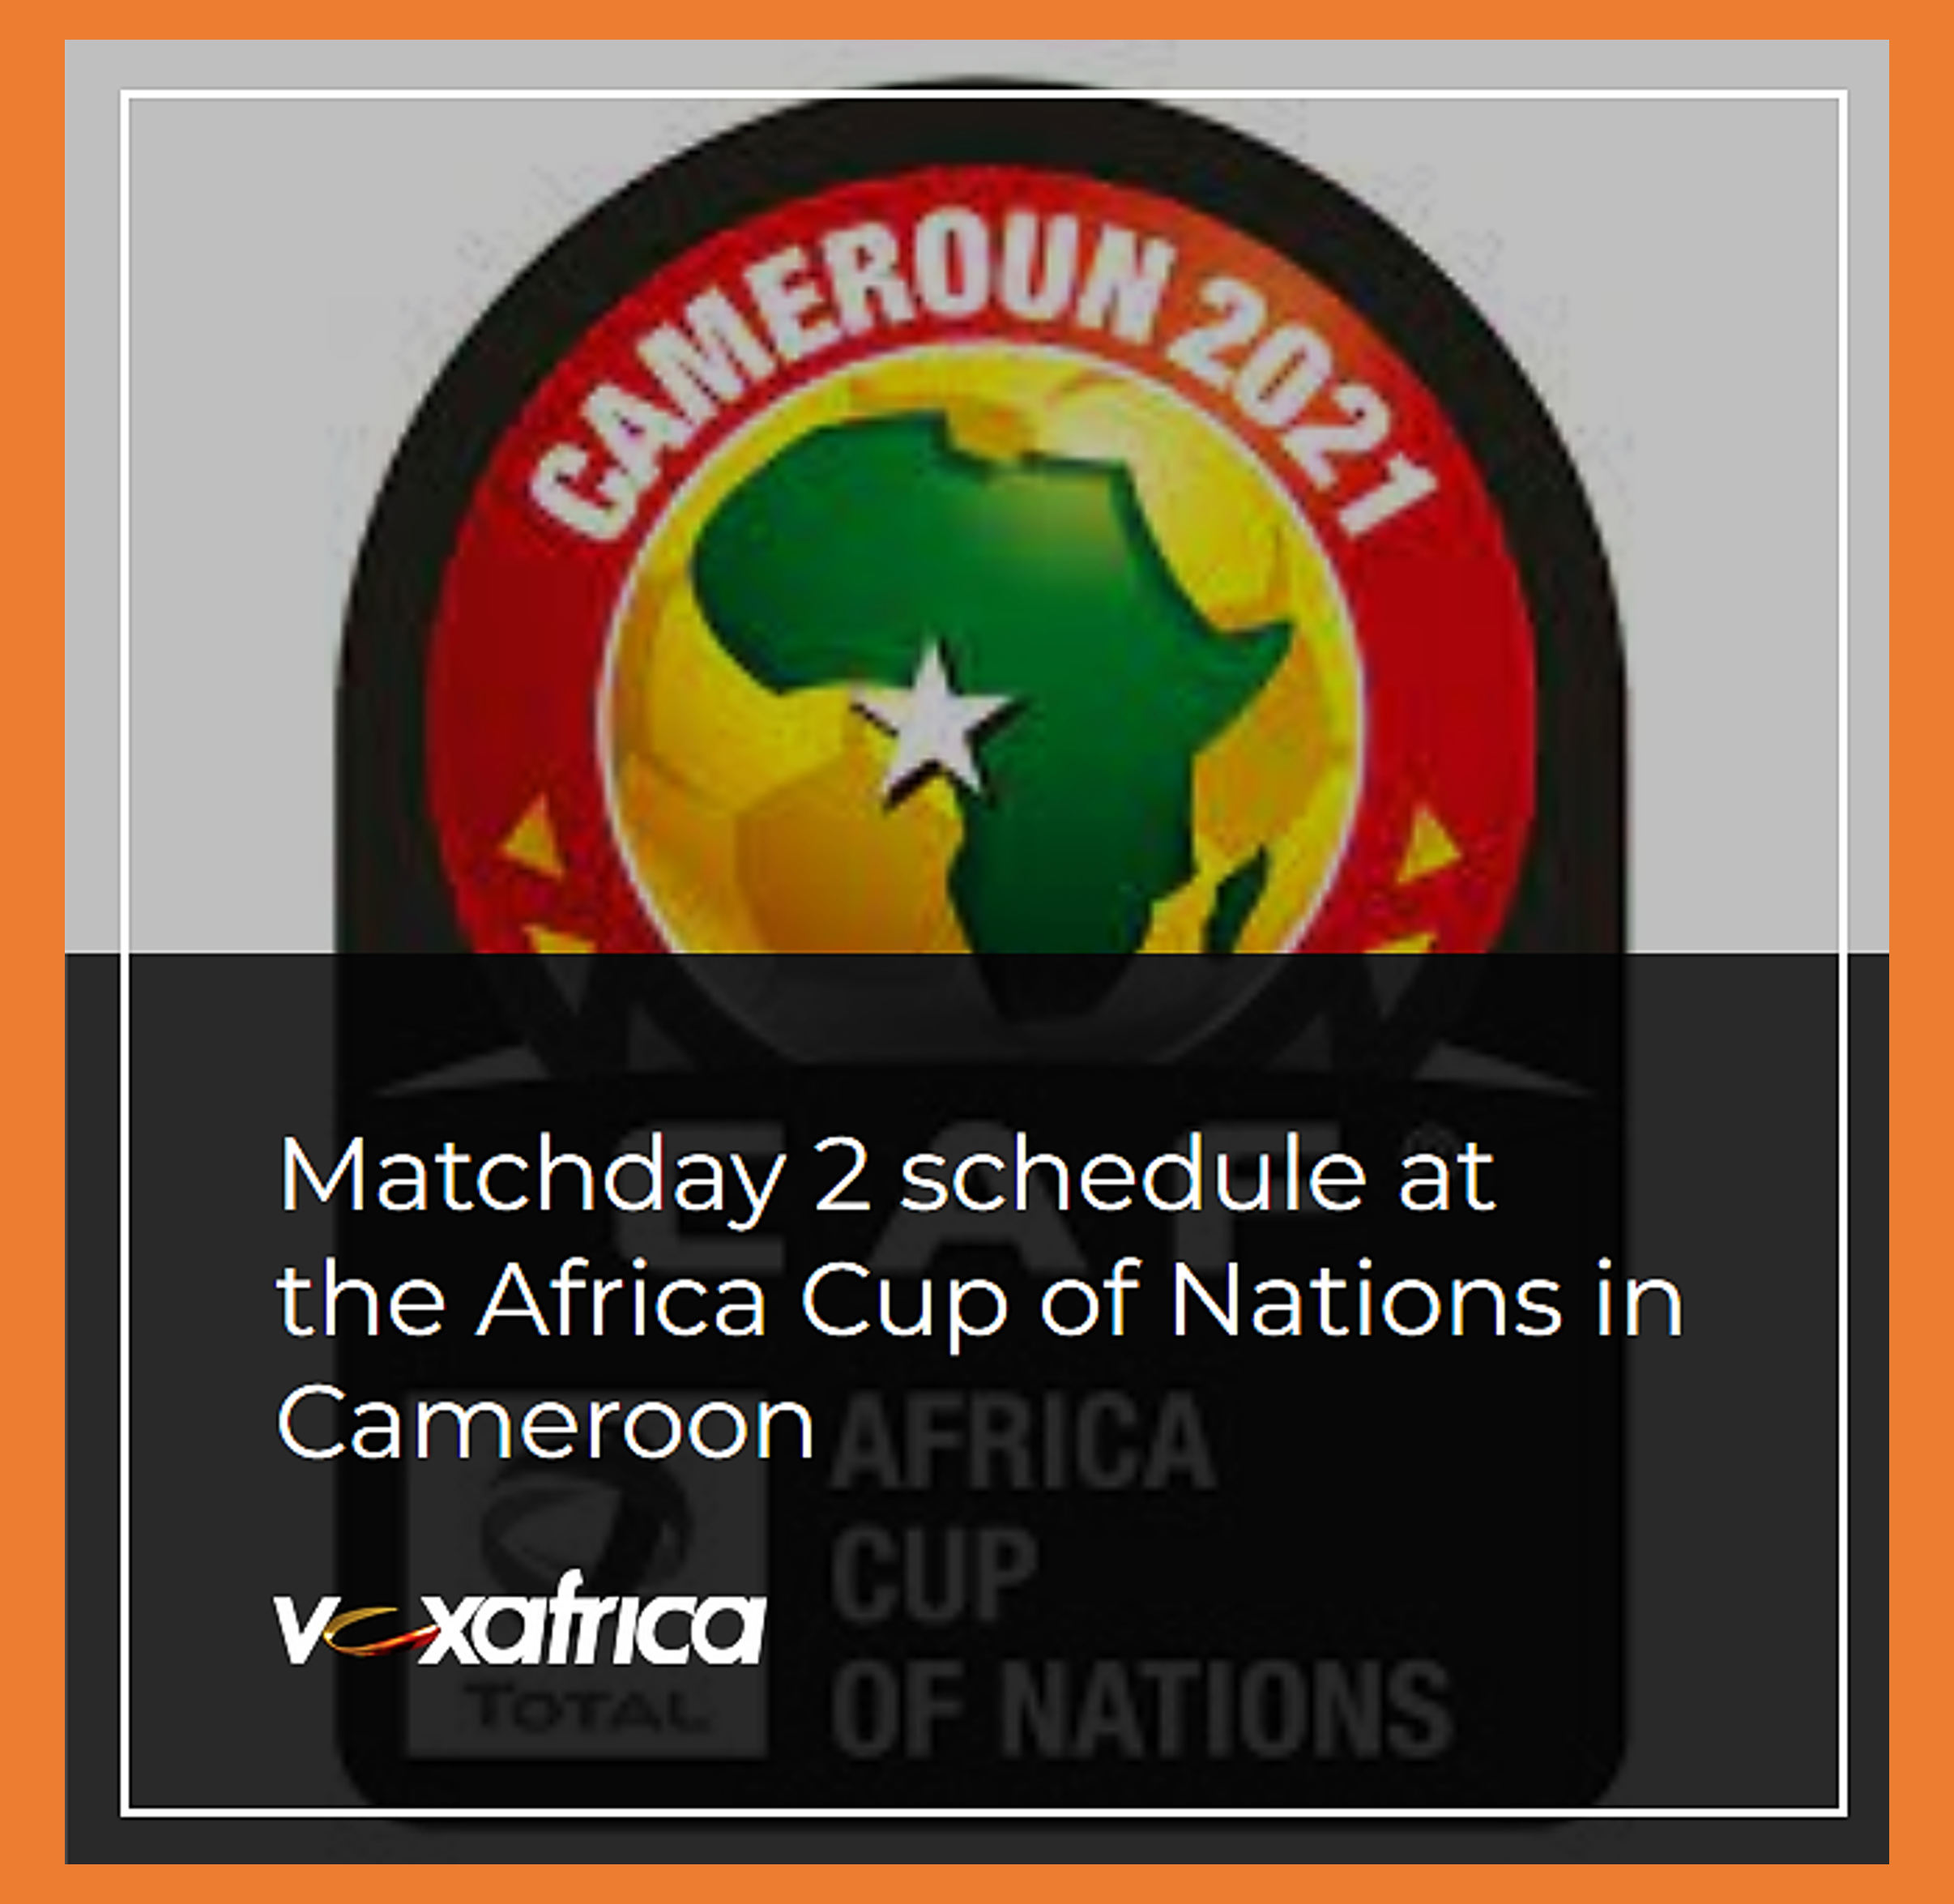 FOOTBALL: AFRICA CUP OF NATIONS MATCHDAY 2 SCHEDULE